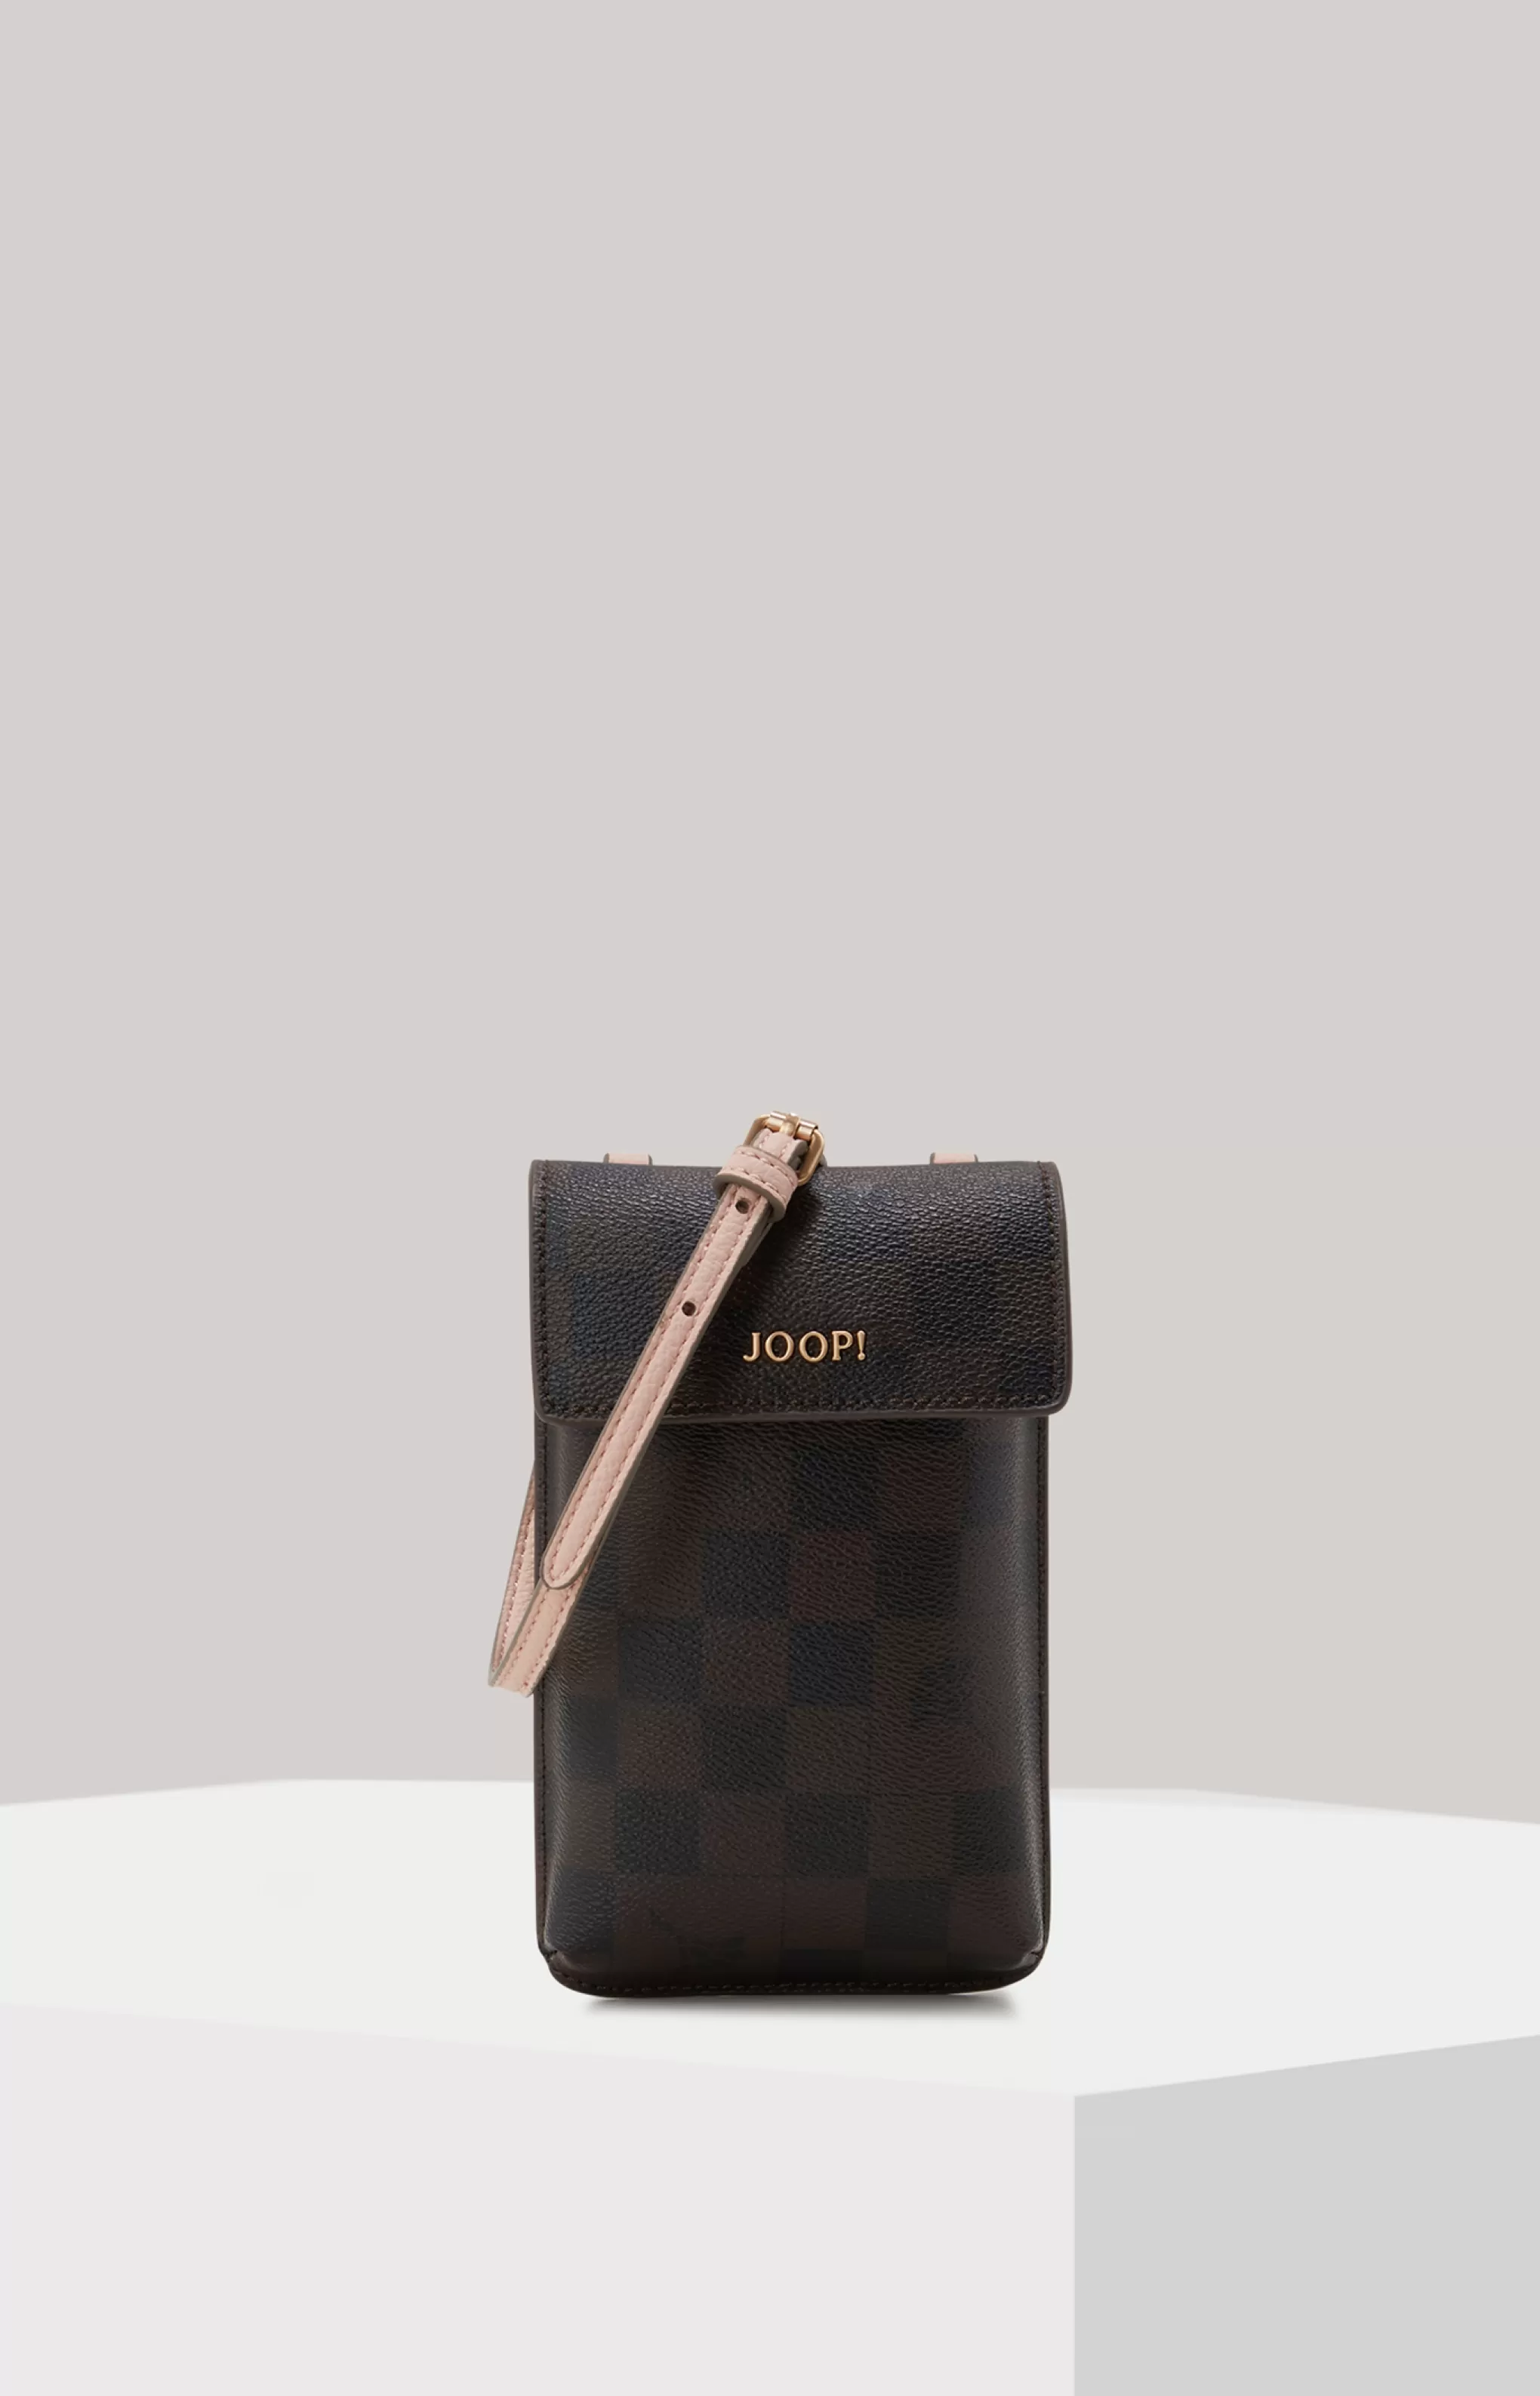 Small Leather Goods | Bags*JOOP Small Leather Goods | Bags Piazza Edition Pippa Phone Bag in Brown and Black